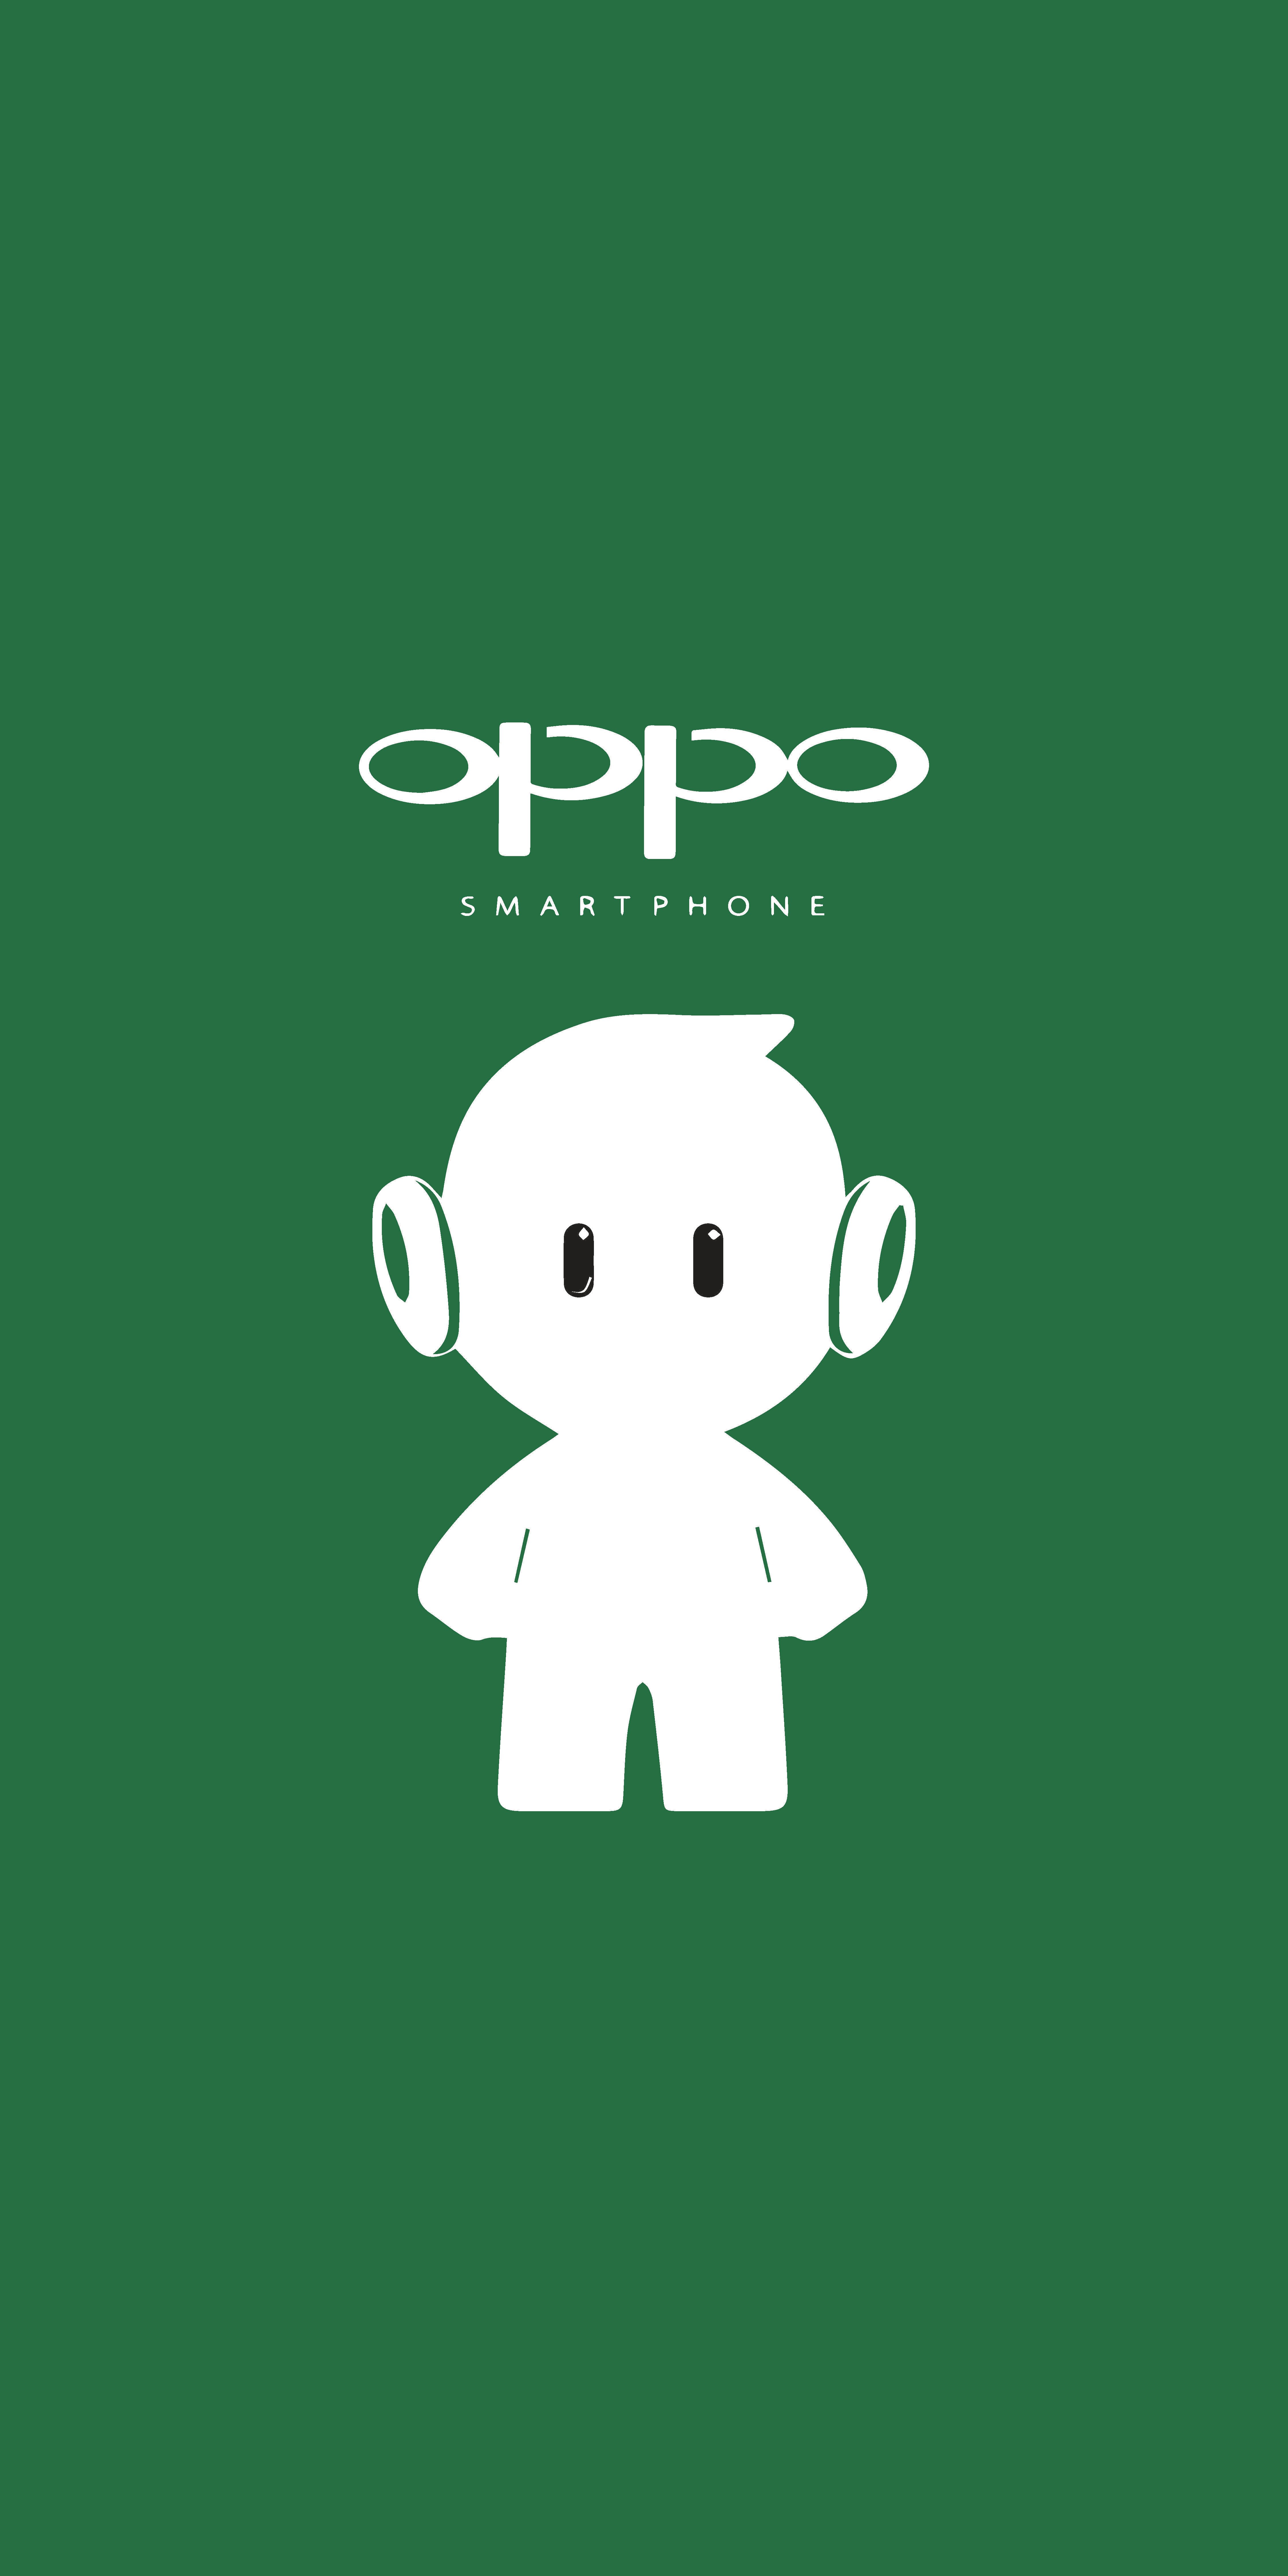 Oppo Logo Wallpapers - Wallpaper Cave